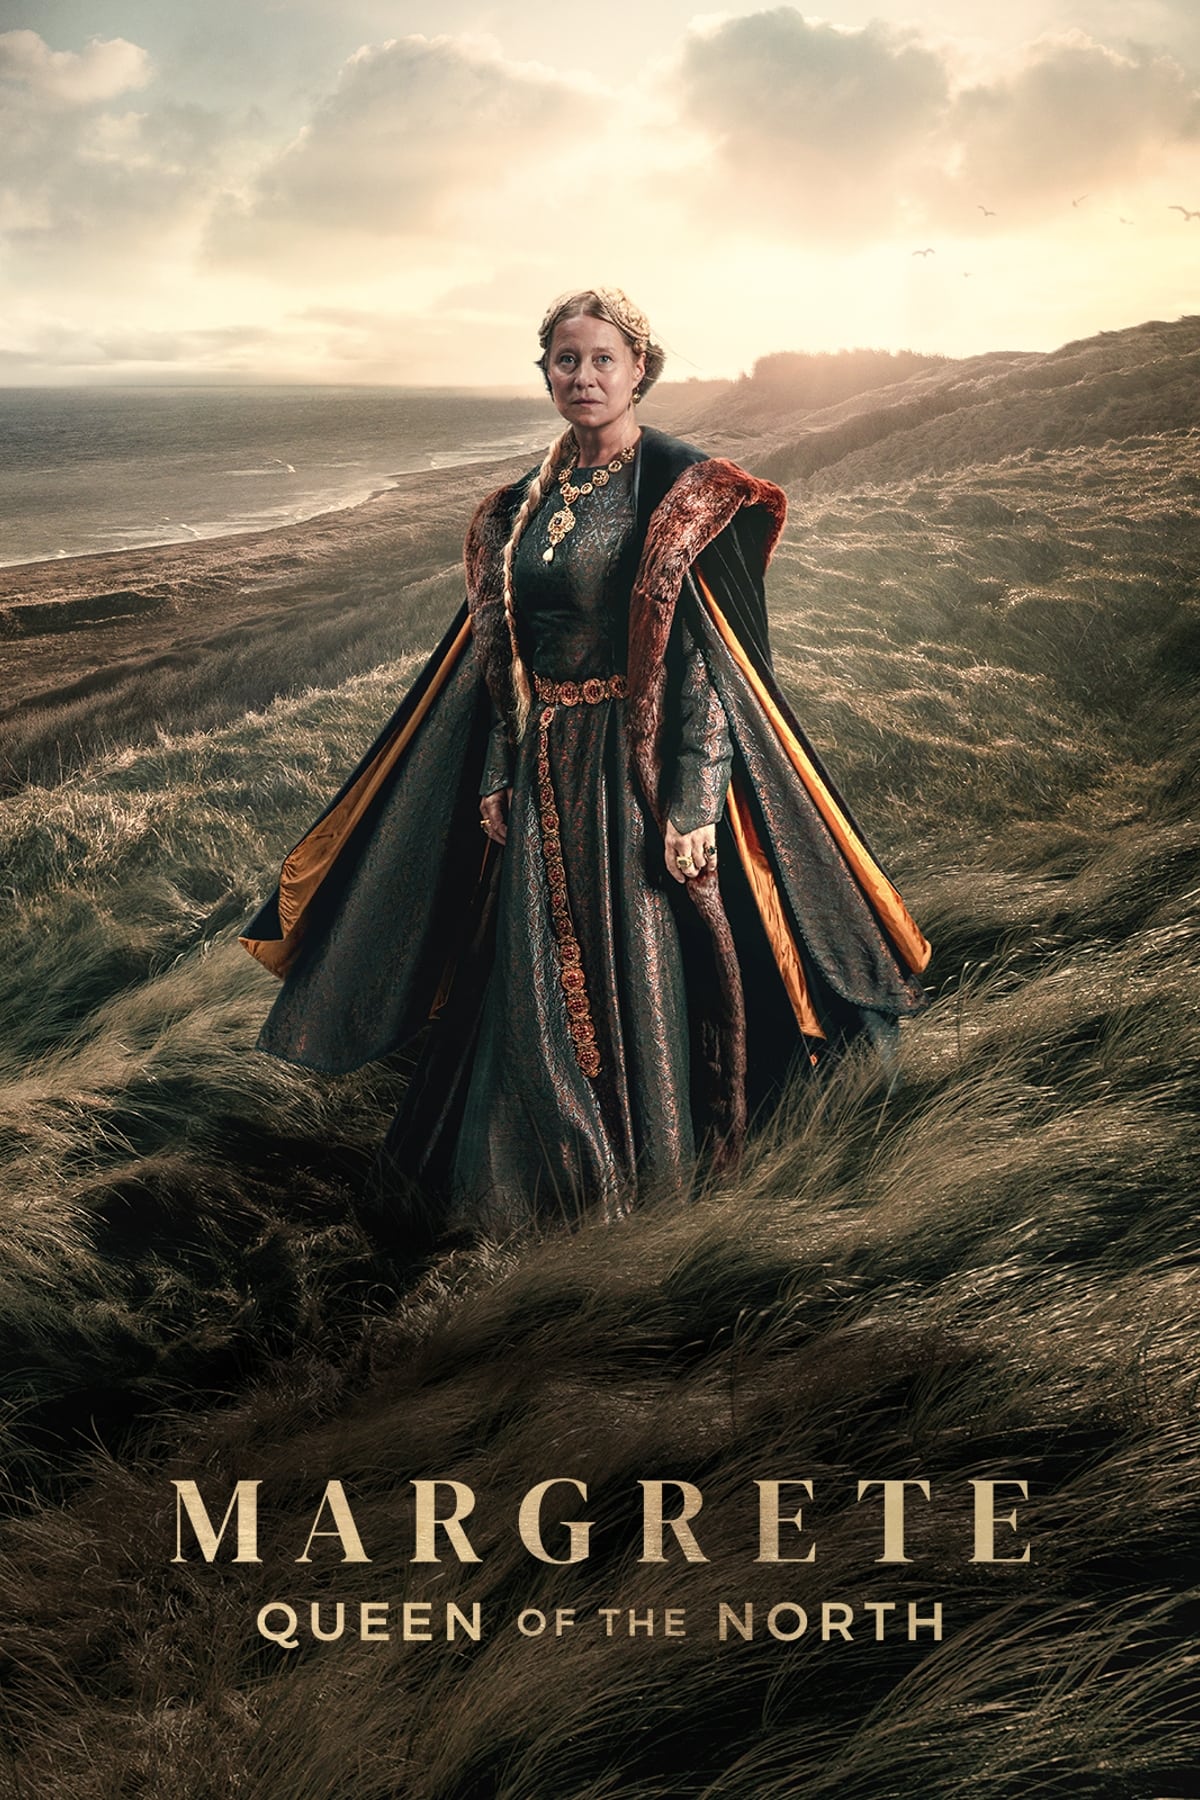 Margrete Queen of the North